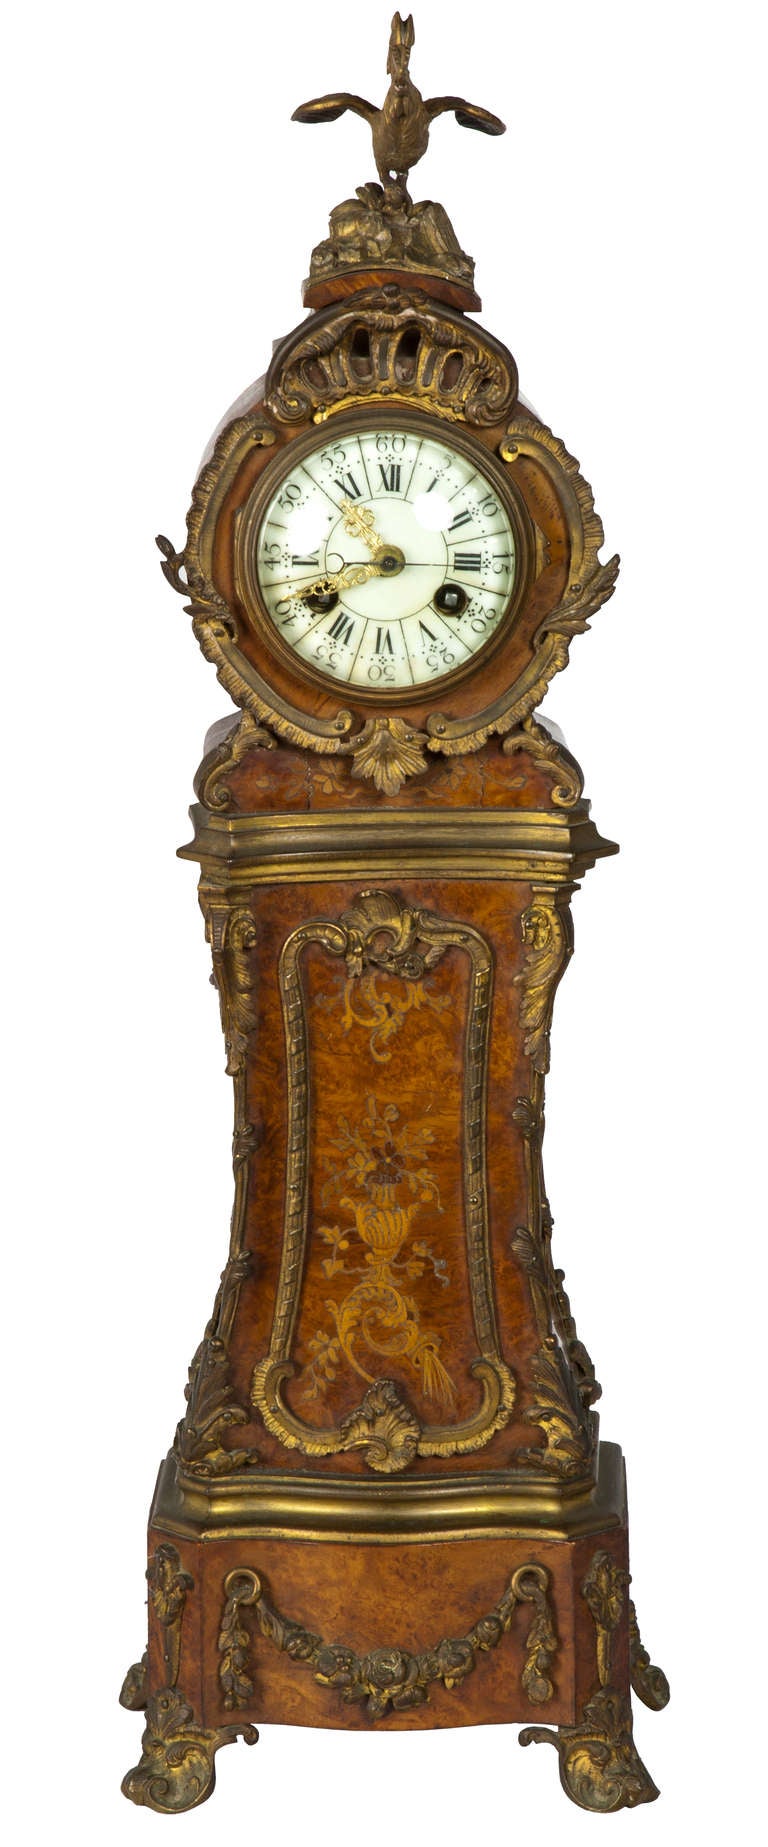 This small clock, composed of burl walnut is further embellished with fine wood inlay and gilt mounts. The shaping of this clock is French and every surface seems to curve and is integrated in the form of a larger tall case clock. Many of these